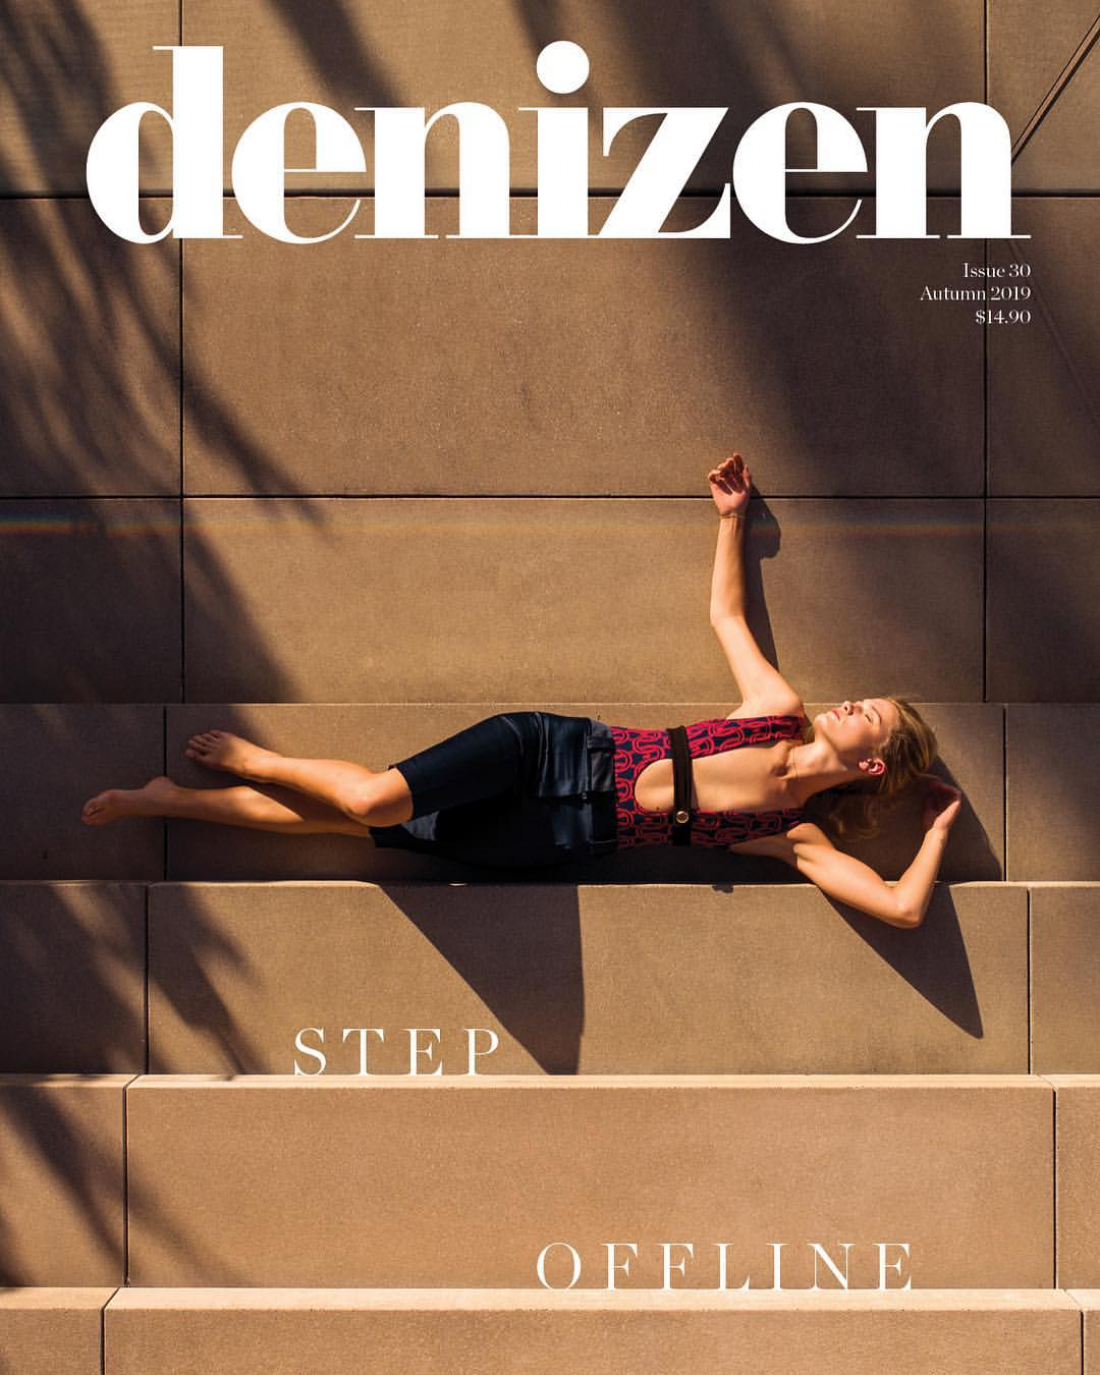 Polly photographed for Denizen magazine Cover & Editorial by Mara Sommer & Petra Leary; styled by Margie Cooney HMU Virginia Carde